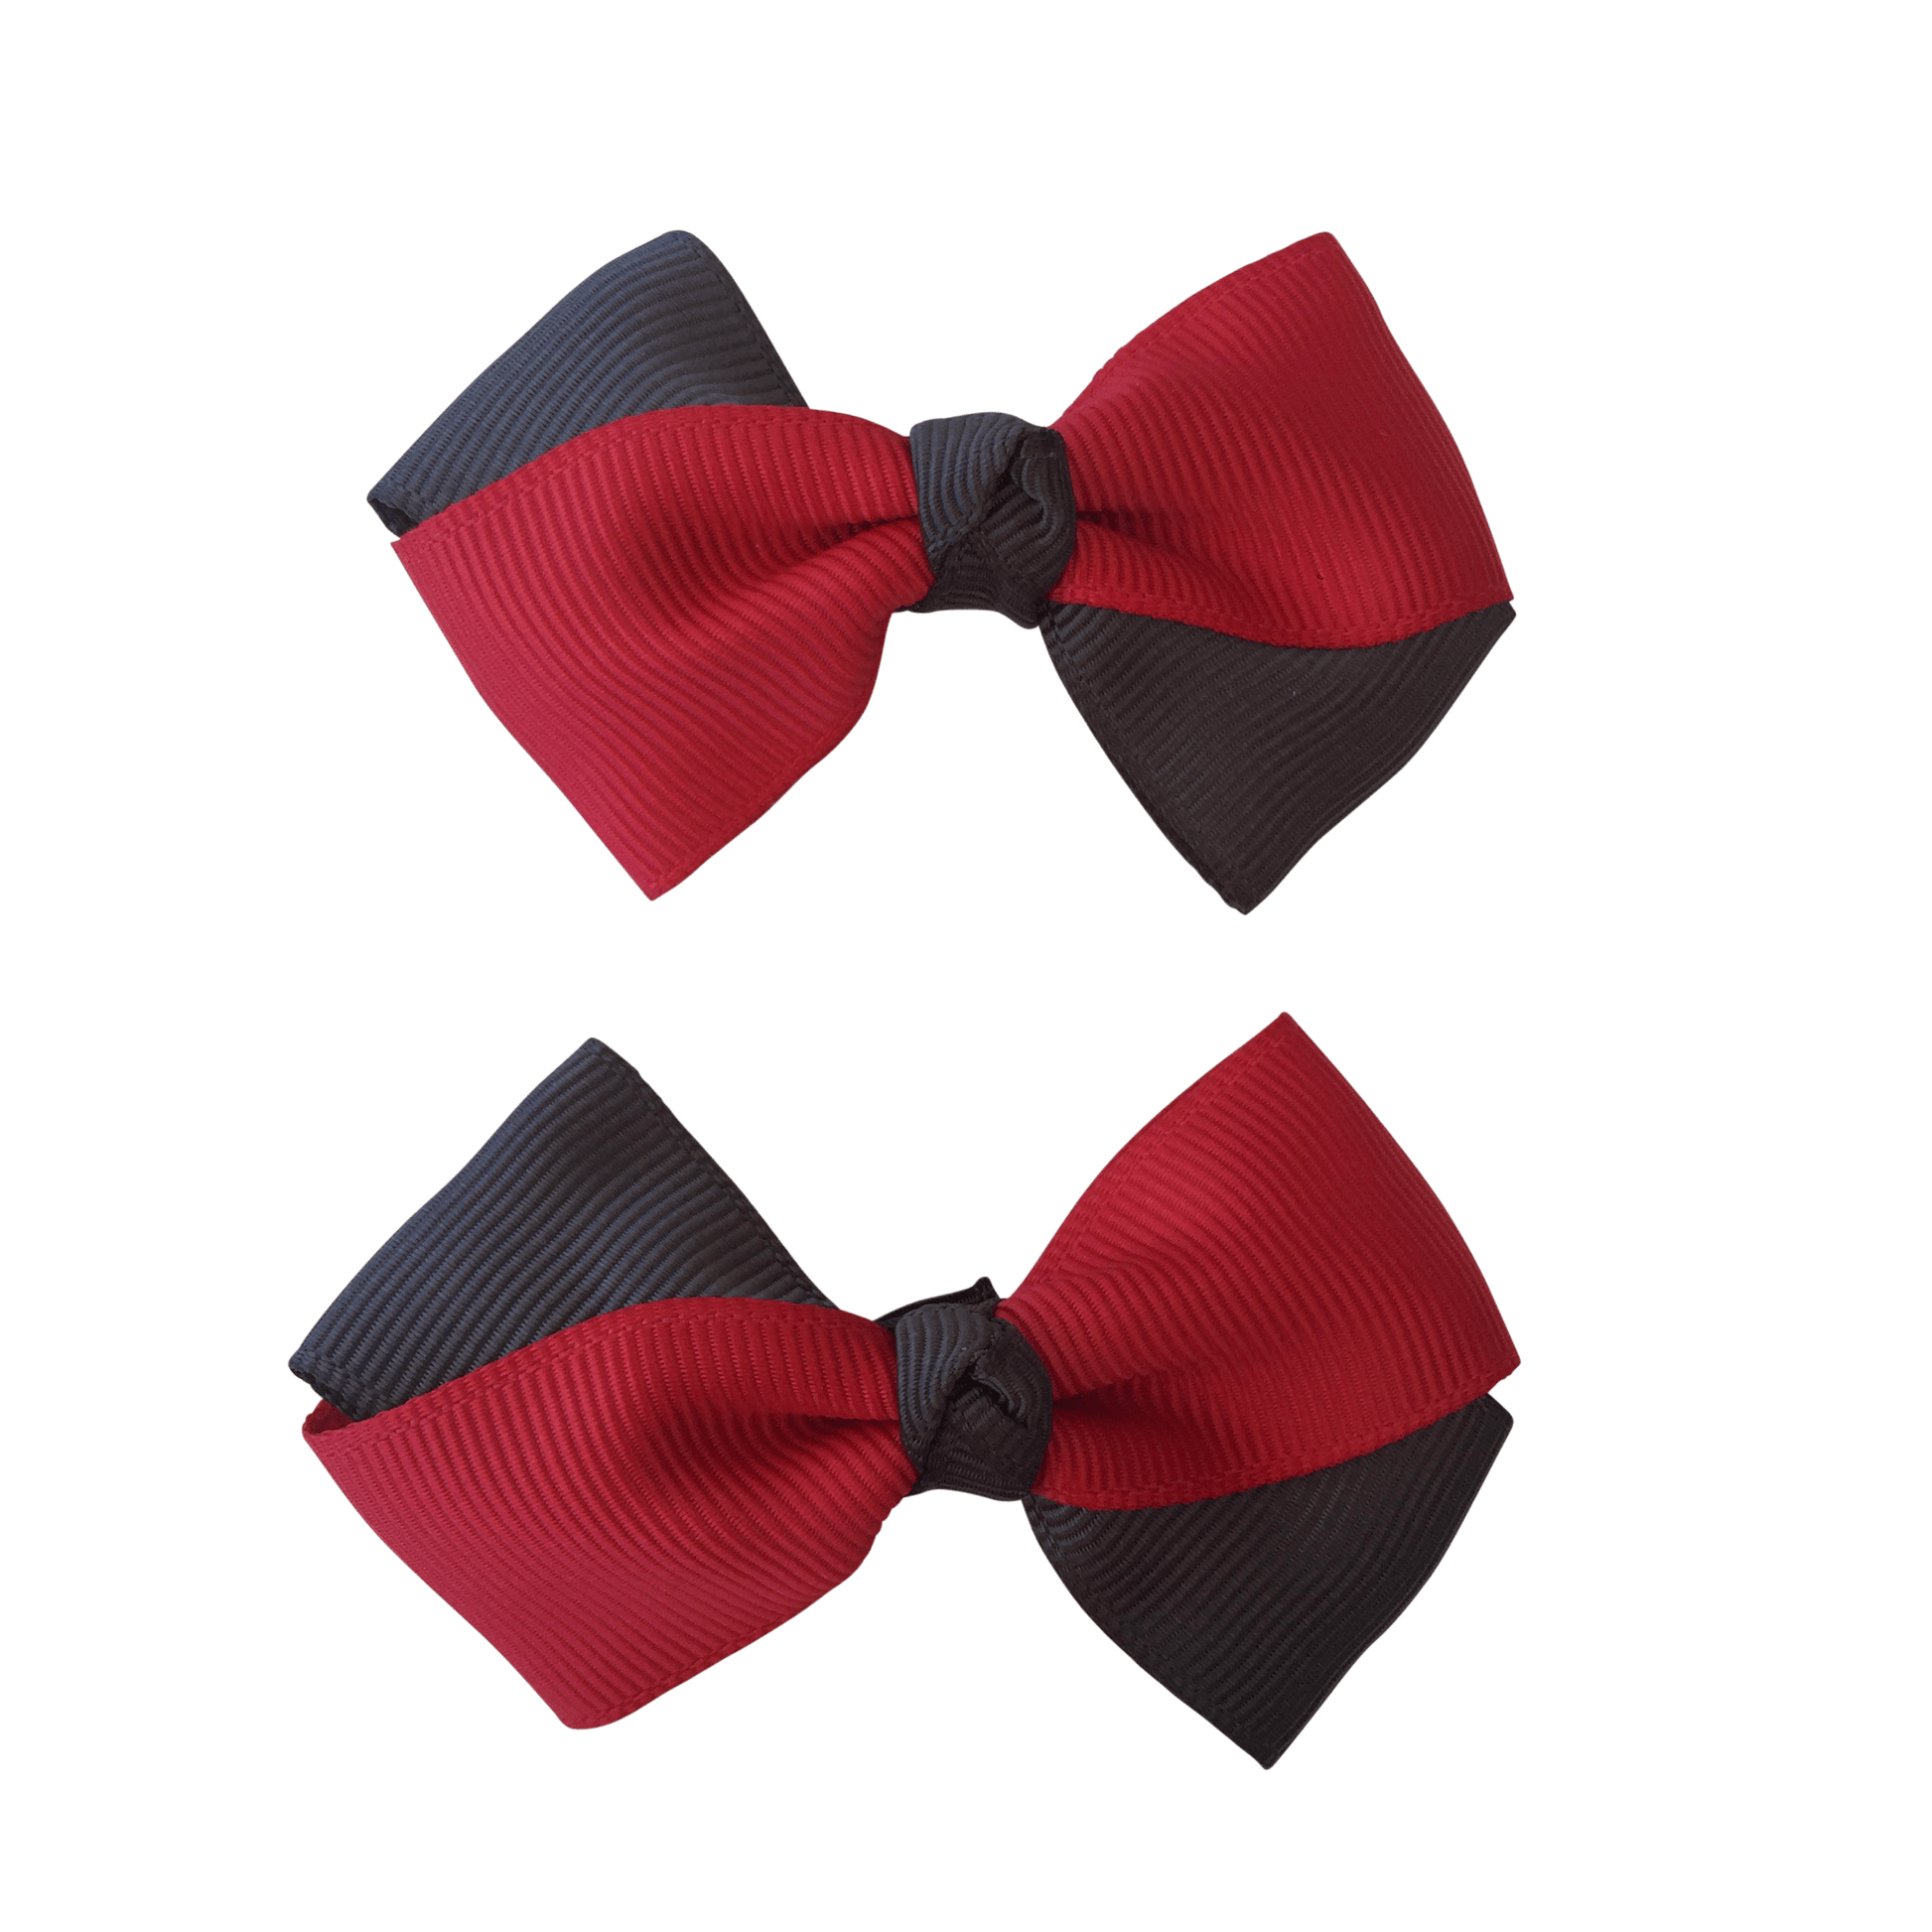 Ruby & Grey Hair Accessories - Ponytails and Fairytales